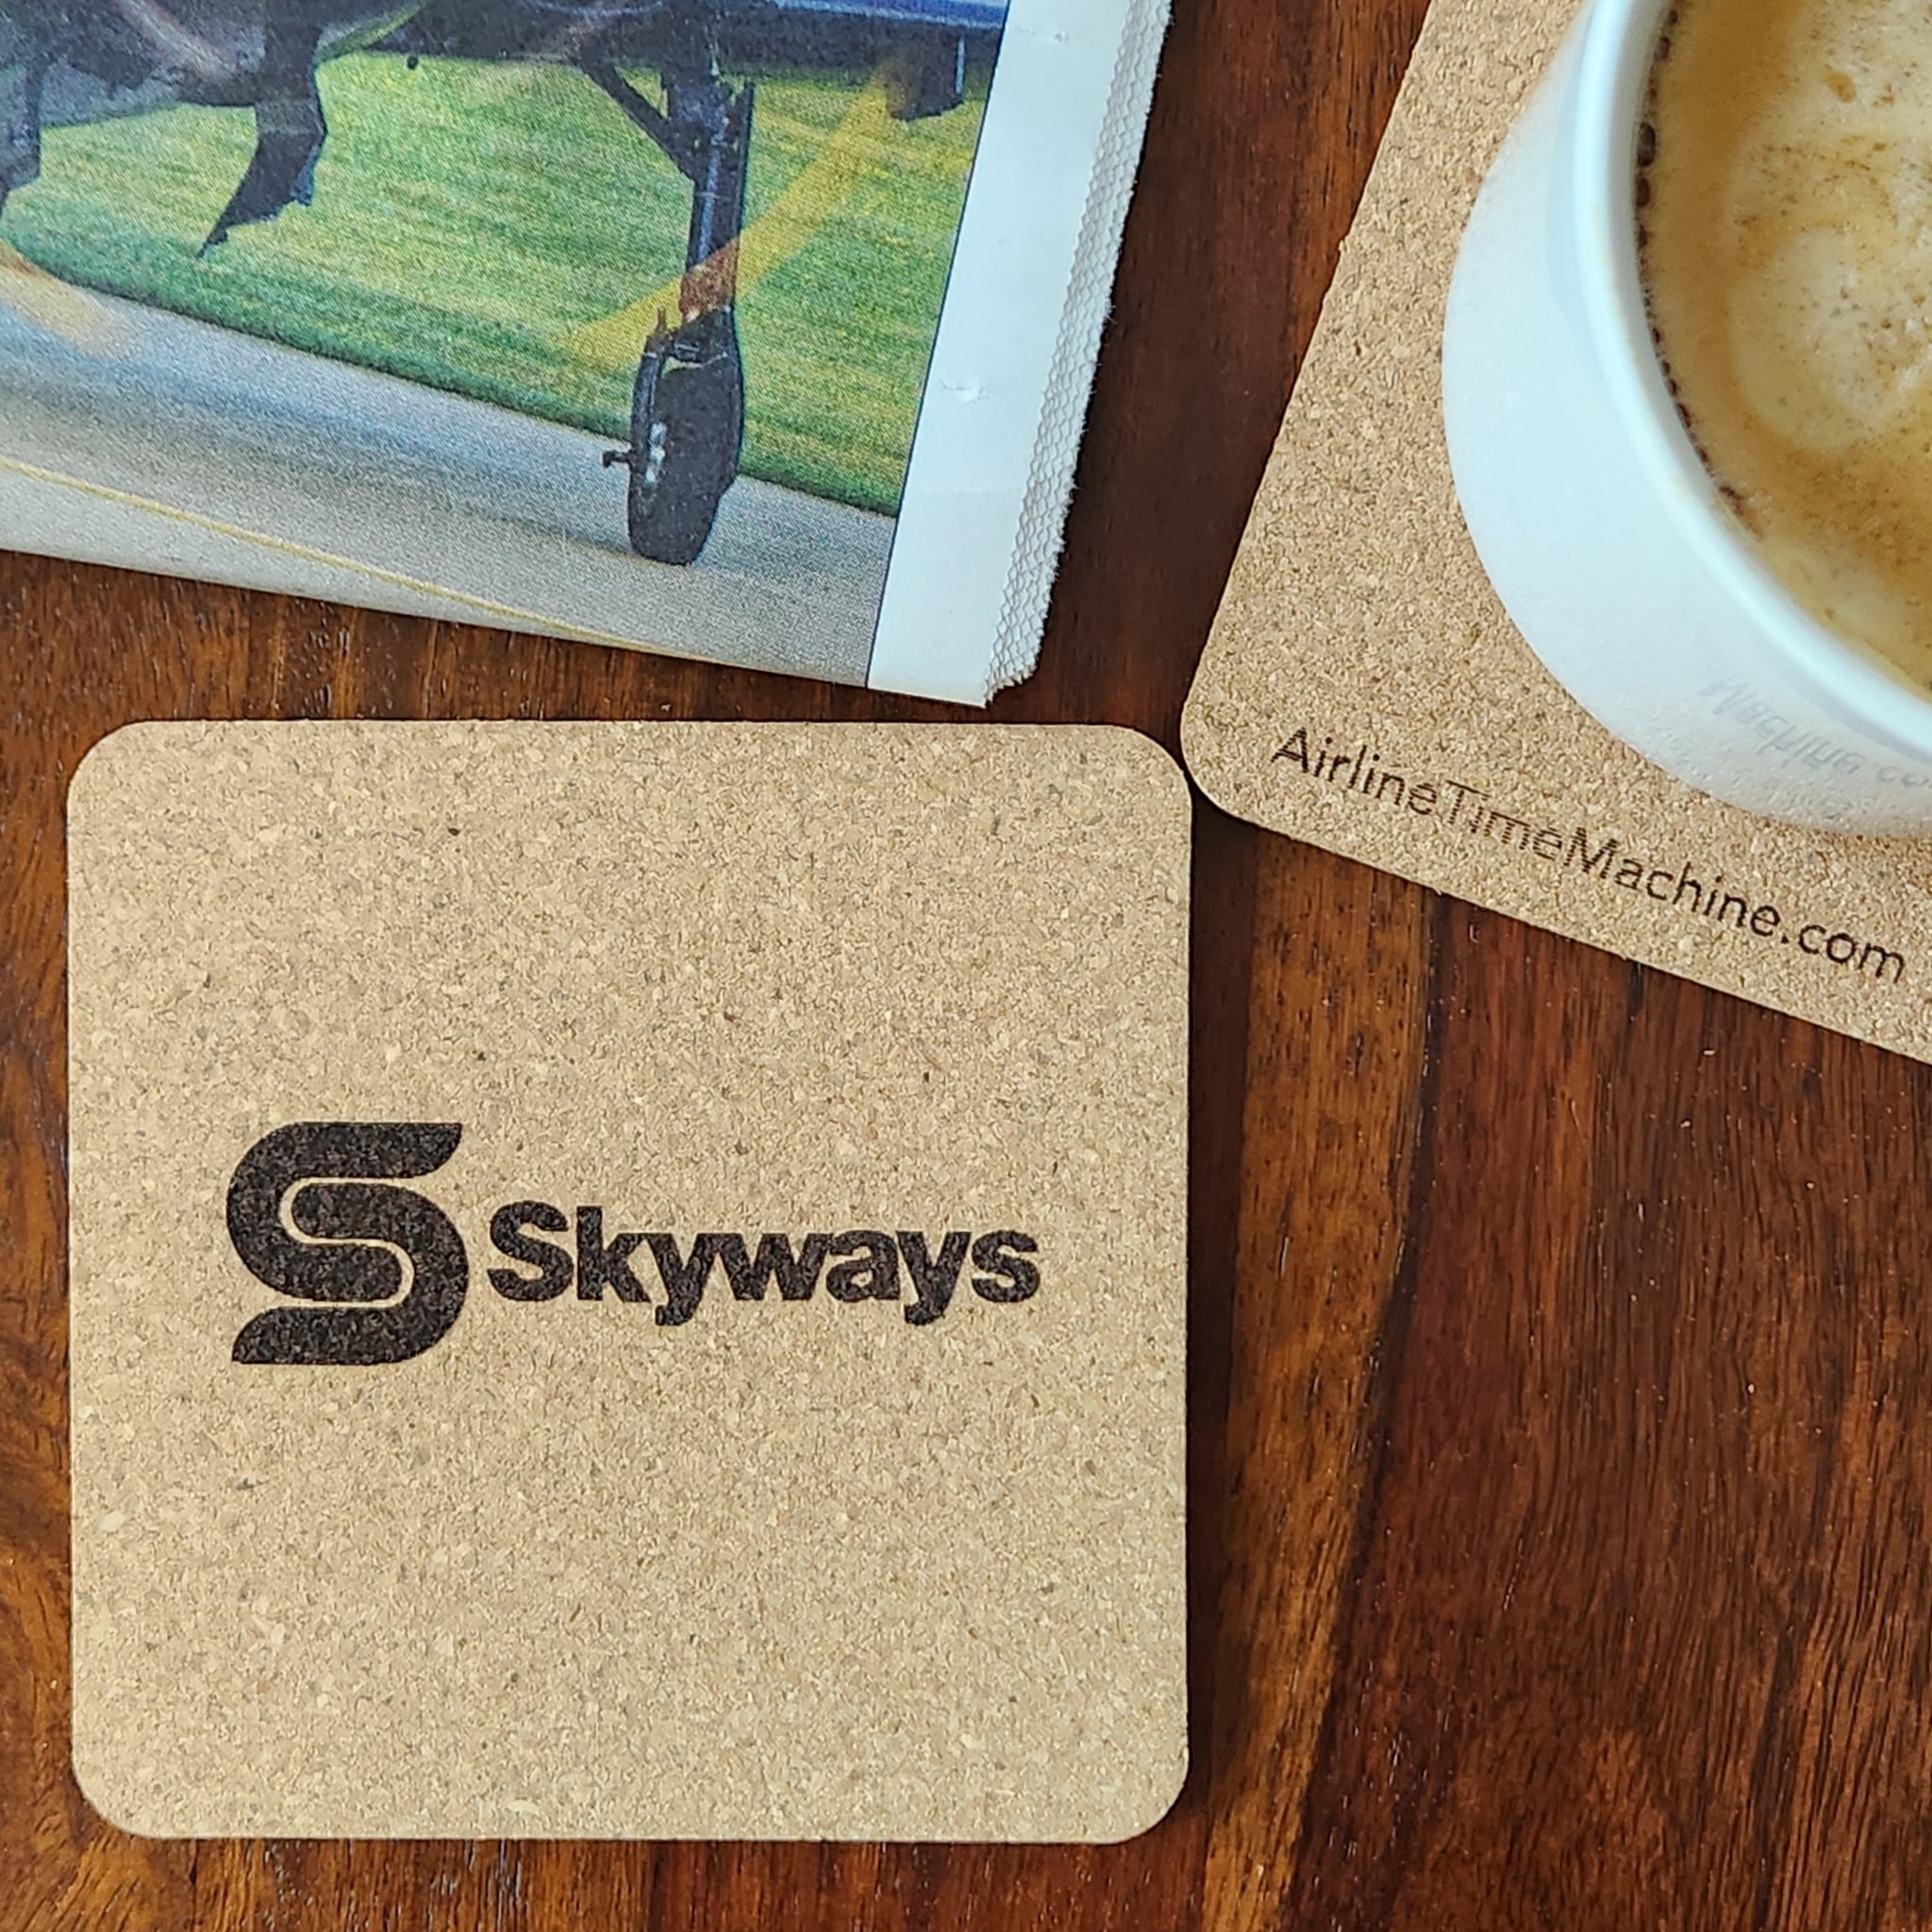 Image of cork coaster with Skyways branding impression.